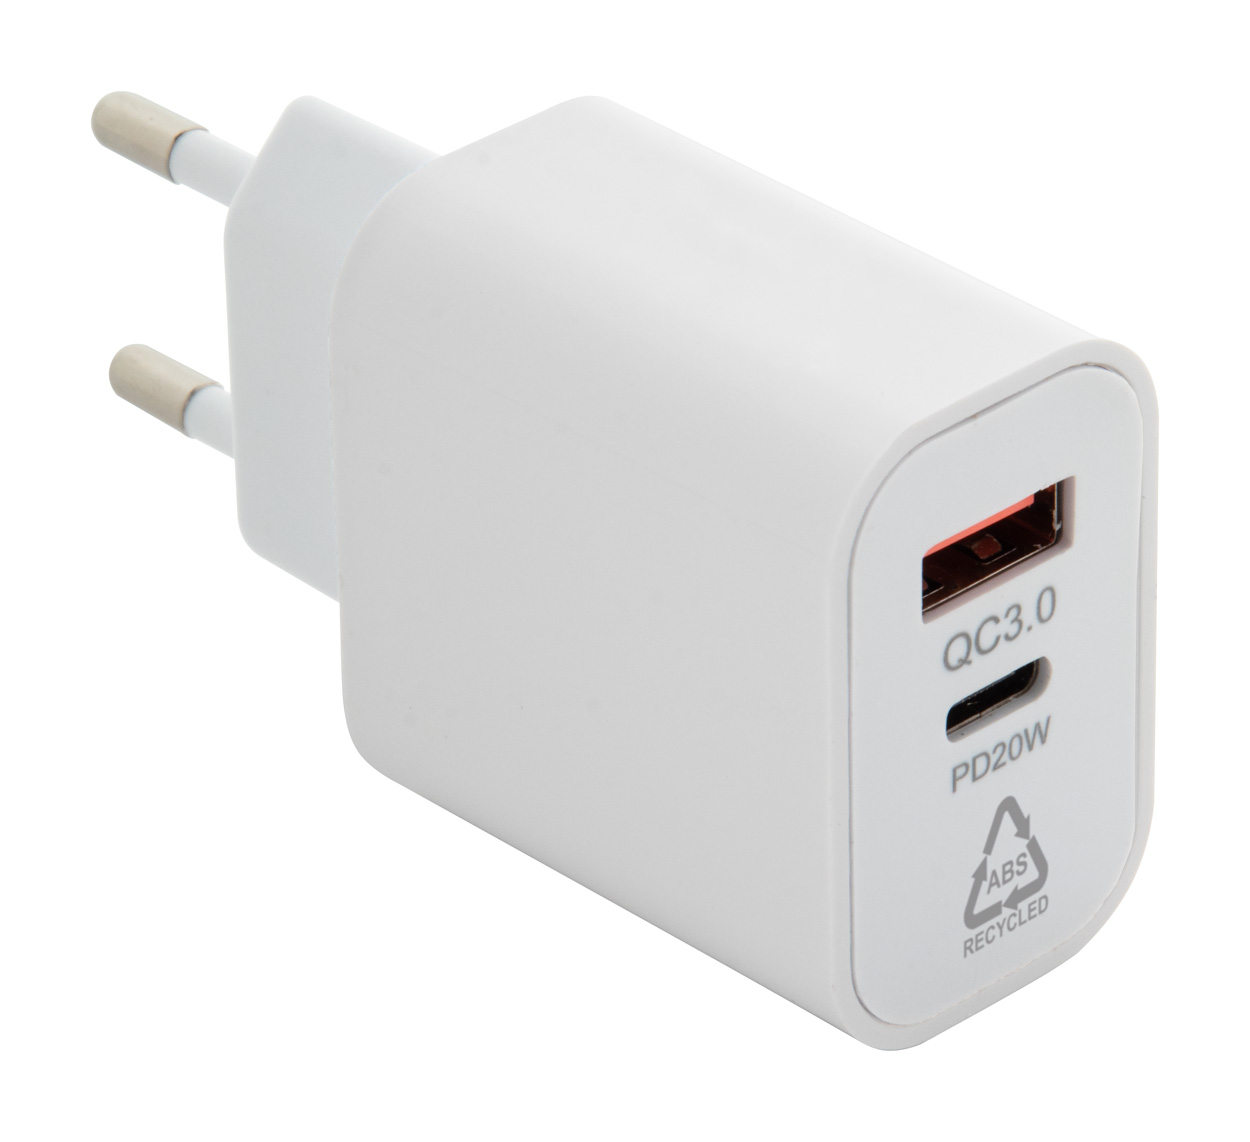 Promo Recharge RABS USB wall charger